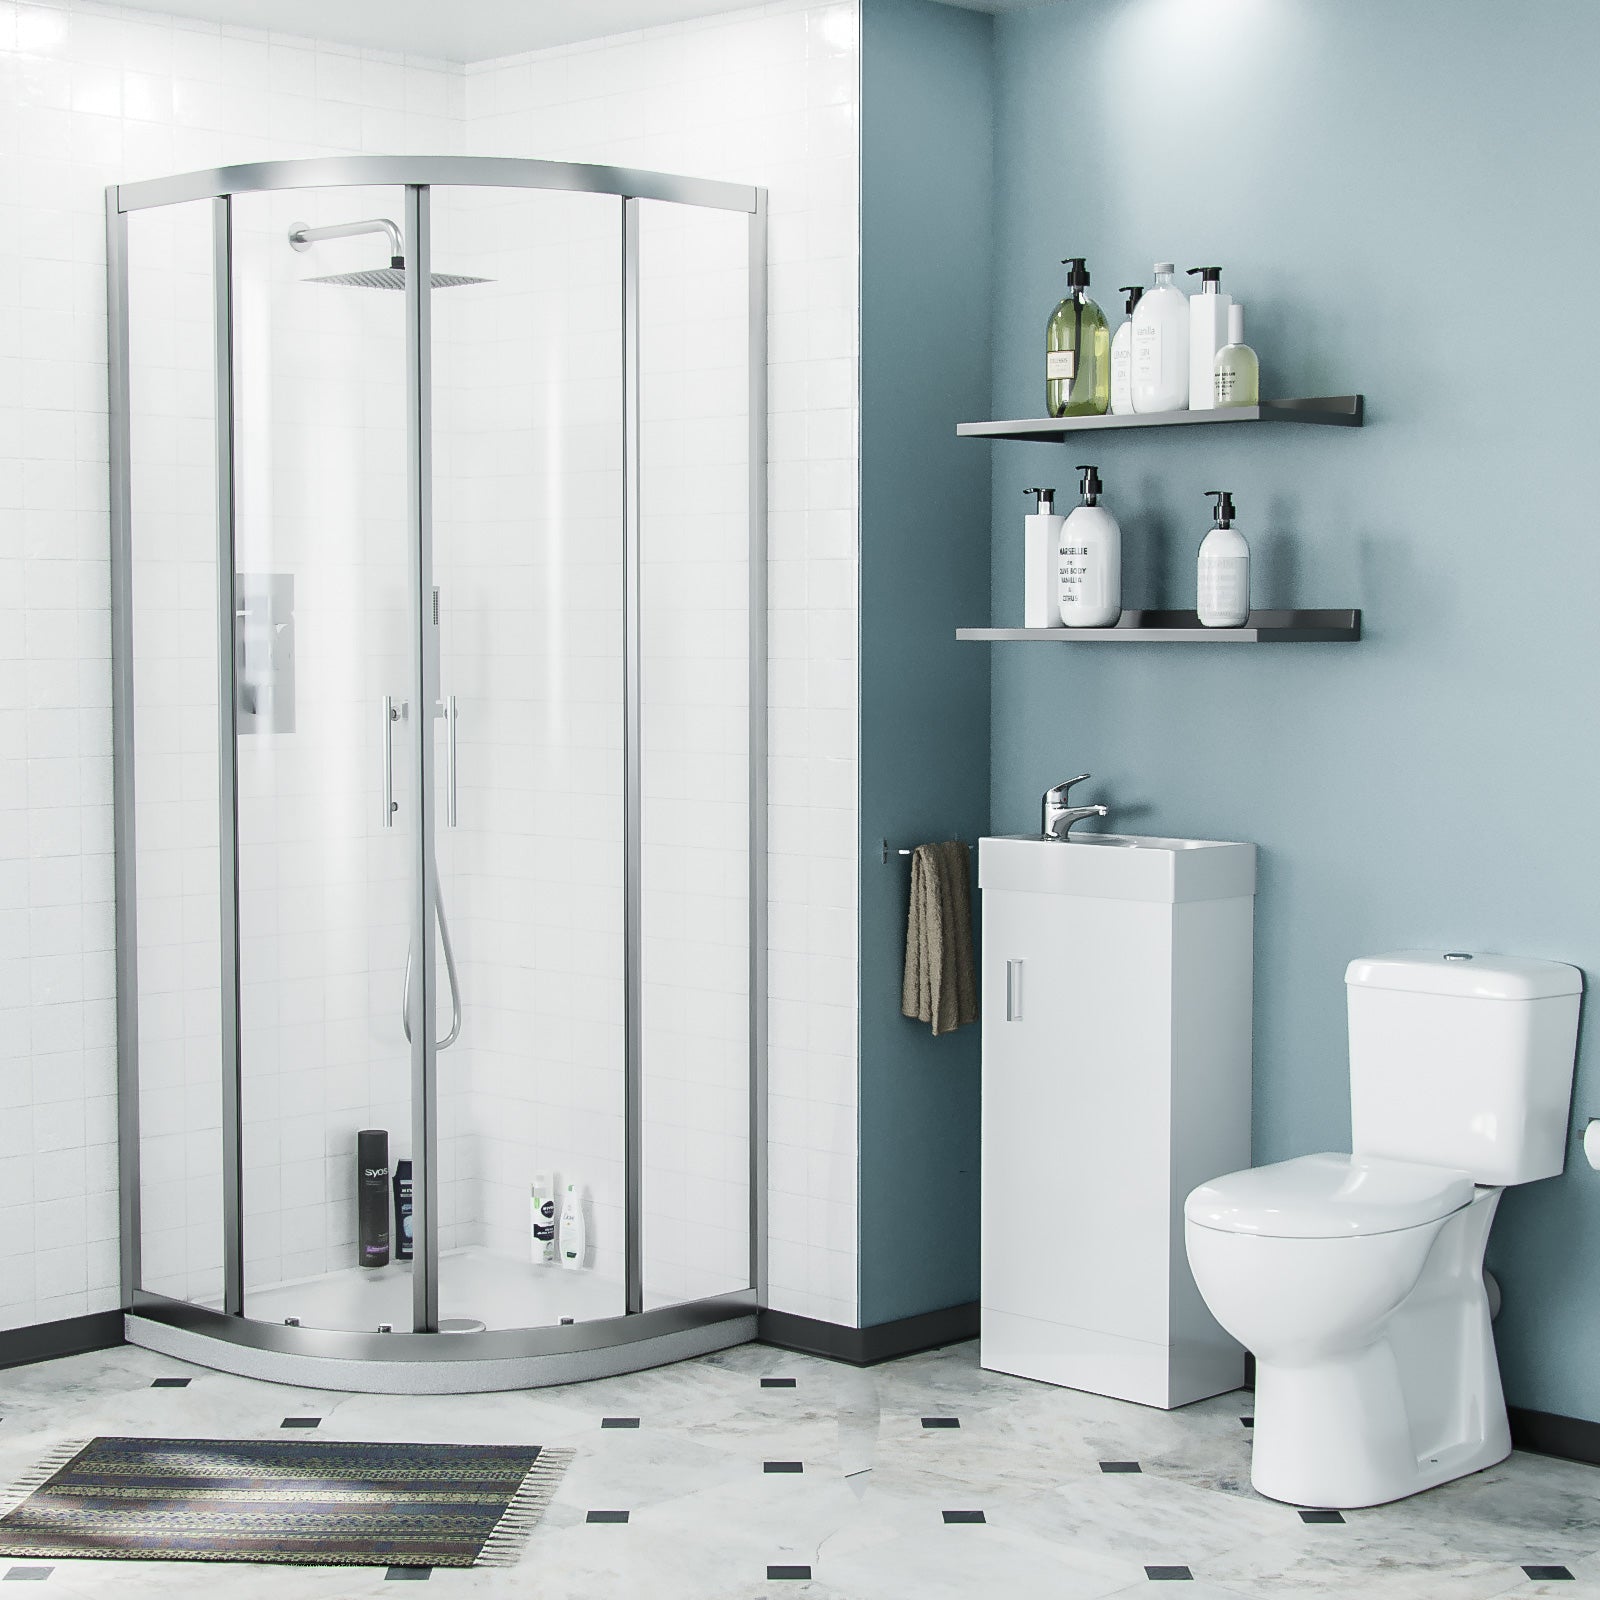 Lindley 3-Piece White Shower Enclosure Suite - 900mm Quadrant Shower Enclosure with Tray, Close Coupled WC Toilet with Seat and Floorstanding 400 mm Vanity Basin Unit